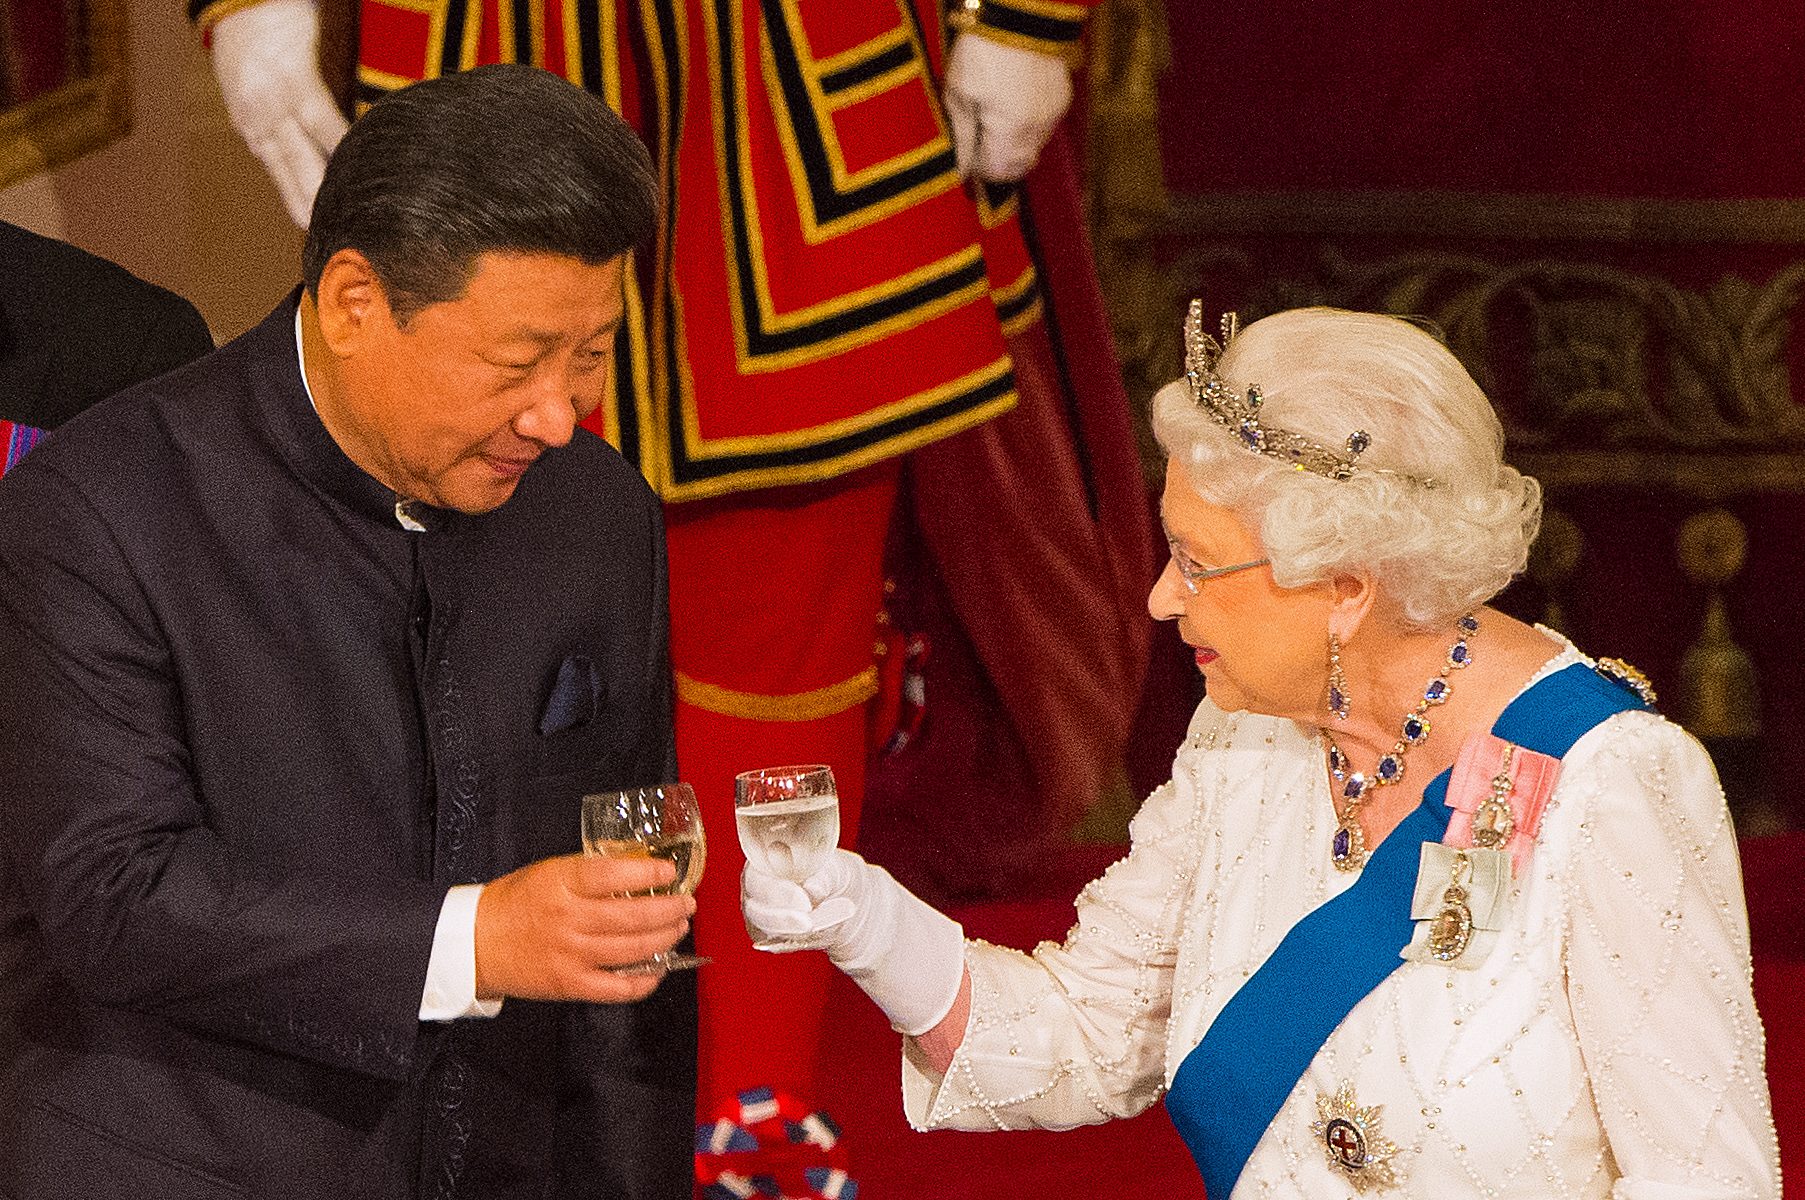 Britain's Queen Elizabeth II hosts a State Banquet for Chinese President Xi Jinping at Buckingham Palace in London, on October 20, 2015,on the first official day of Xi's state visit. Chinese President Xi Jinping arrived for a four-day state visit as the government of Prime Minister David Cameron seeks stronger trade ties with the world's second-largest economy. AFP PHOTO / POOL / DOMINIC LIPINSKI